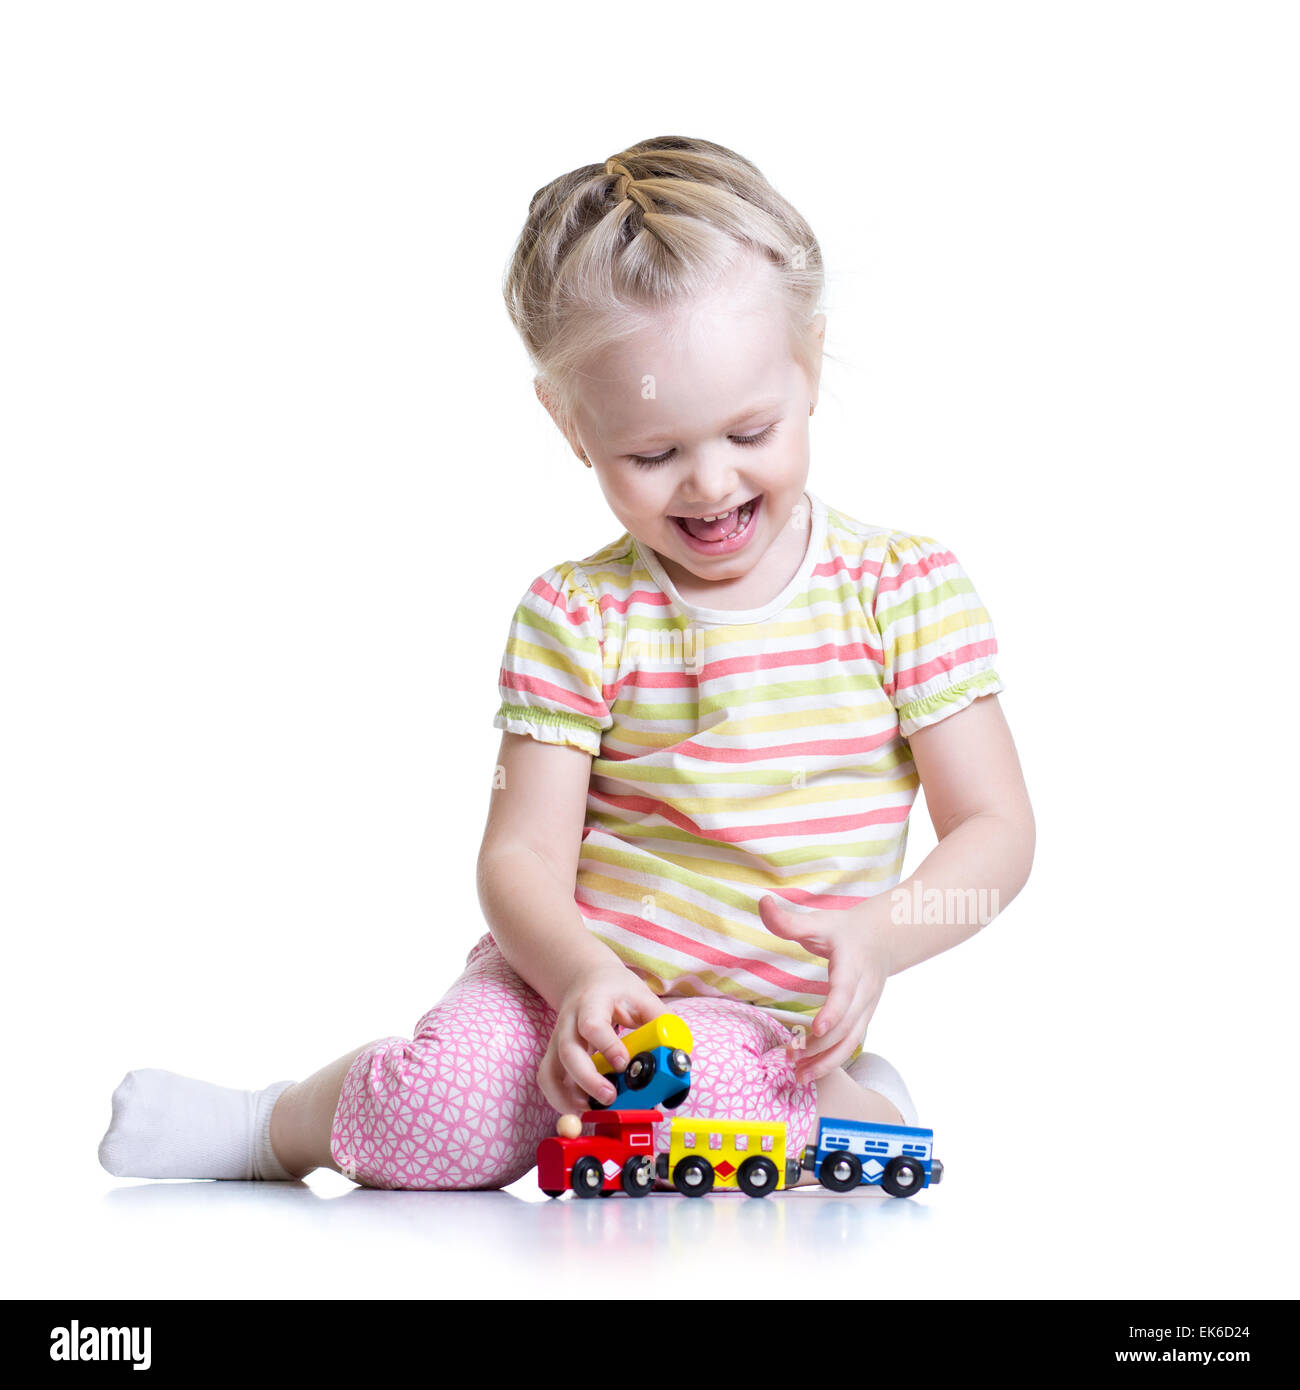 child girl playing with color toys Stock Photo